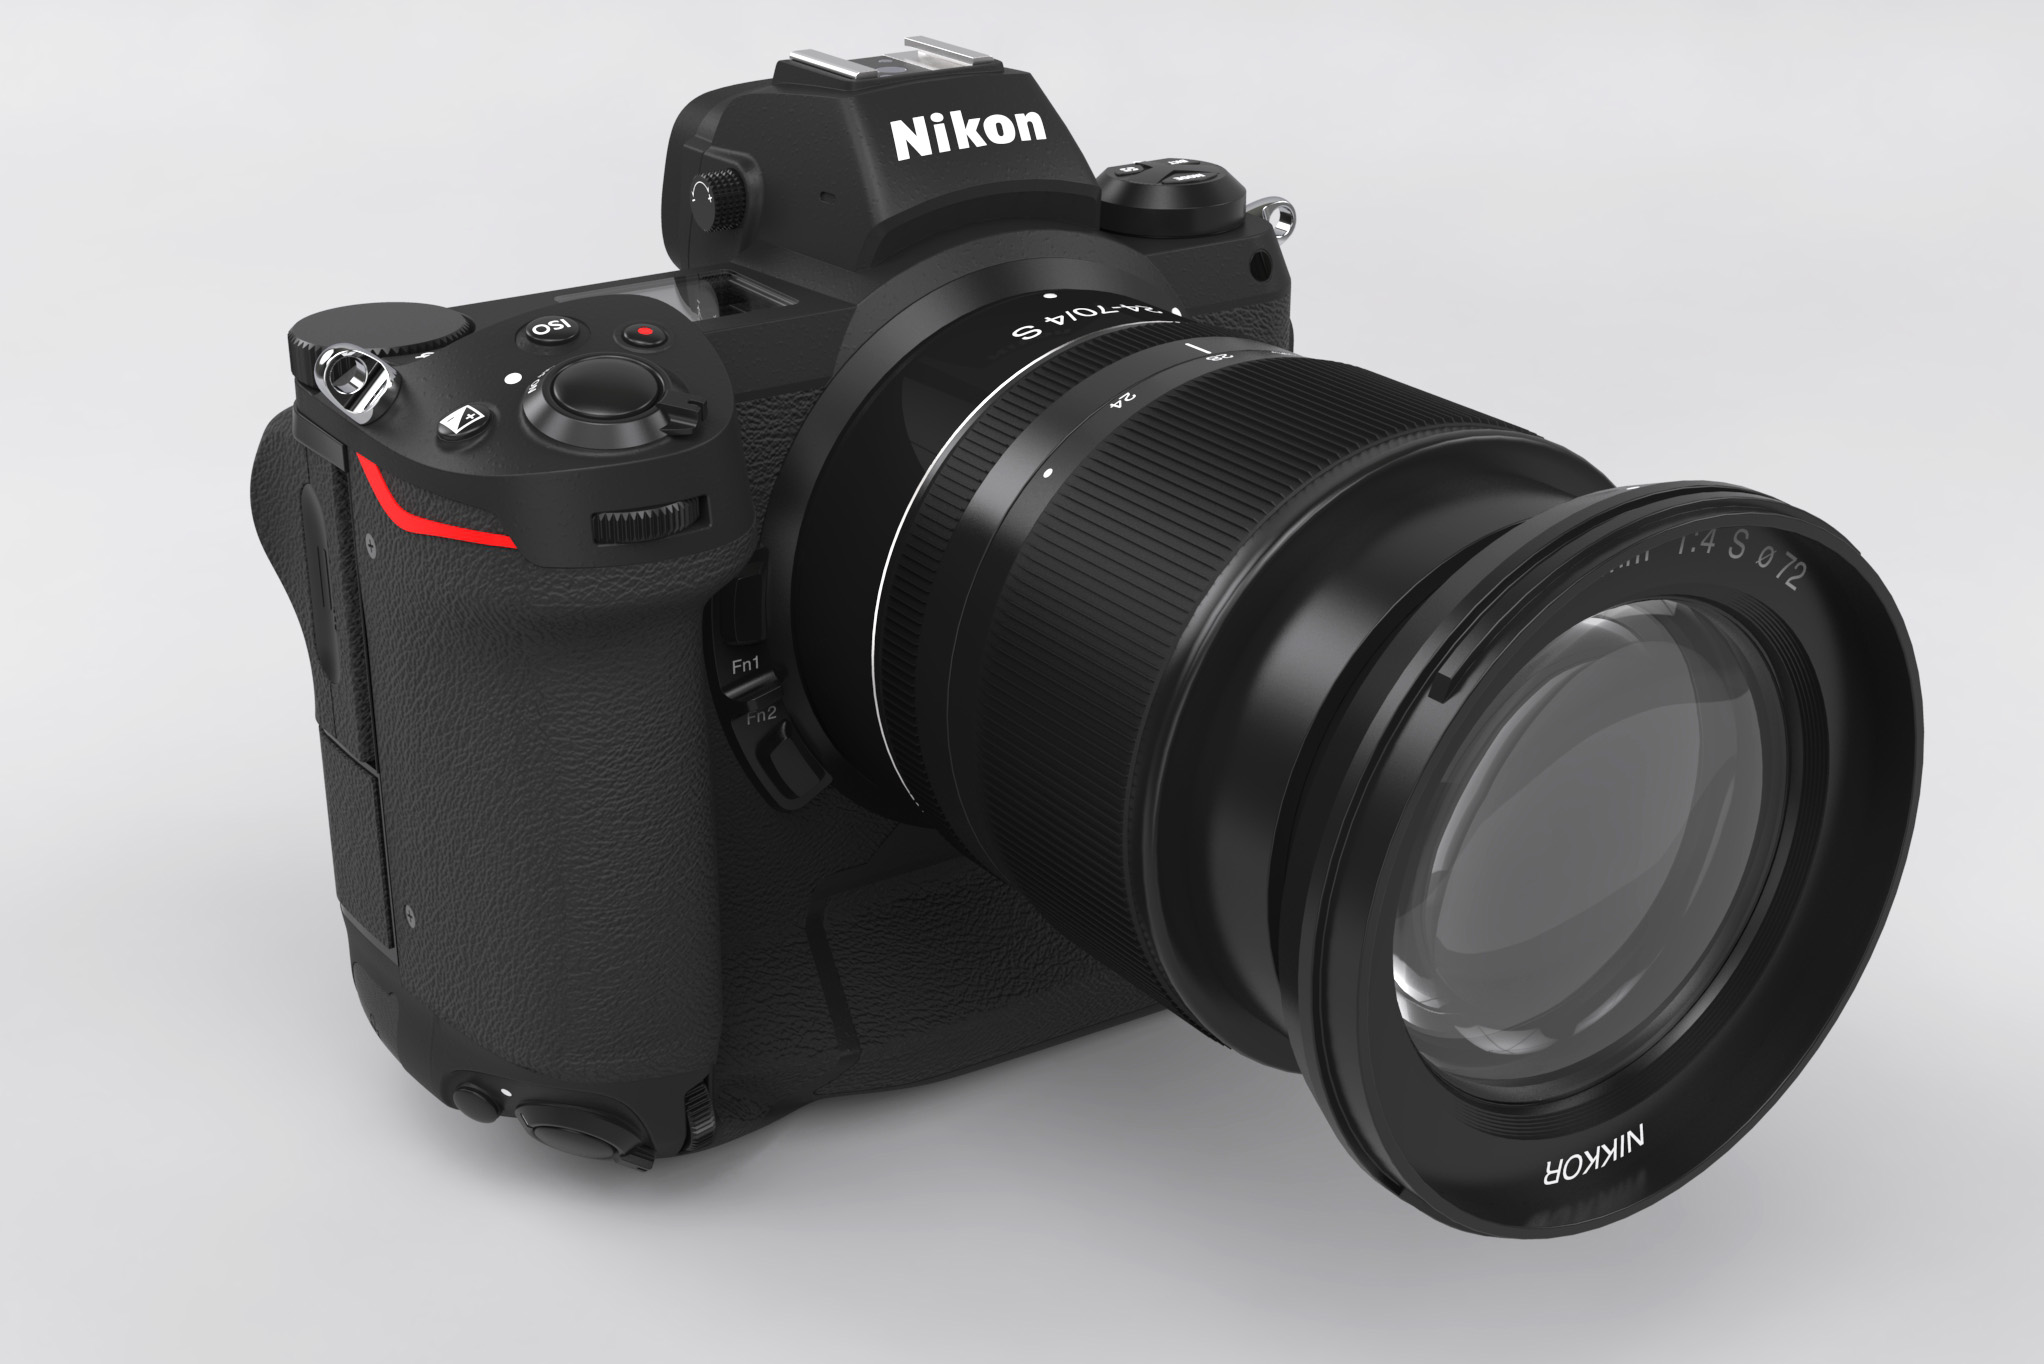 Nikon Z8 Z9 Rumors Confusion Because Up To Five Different New Pro Cameras Are Being Tested Nikon Rumors